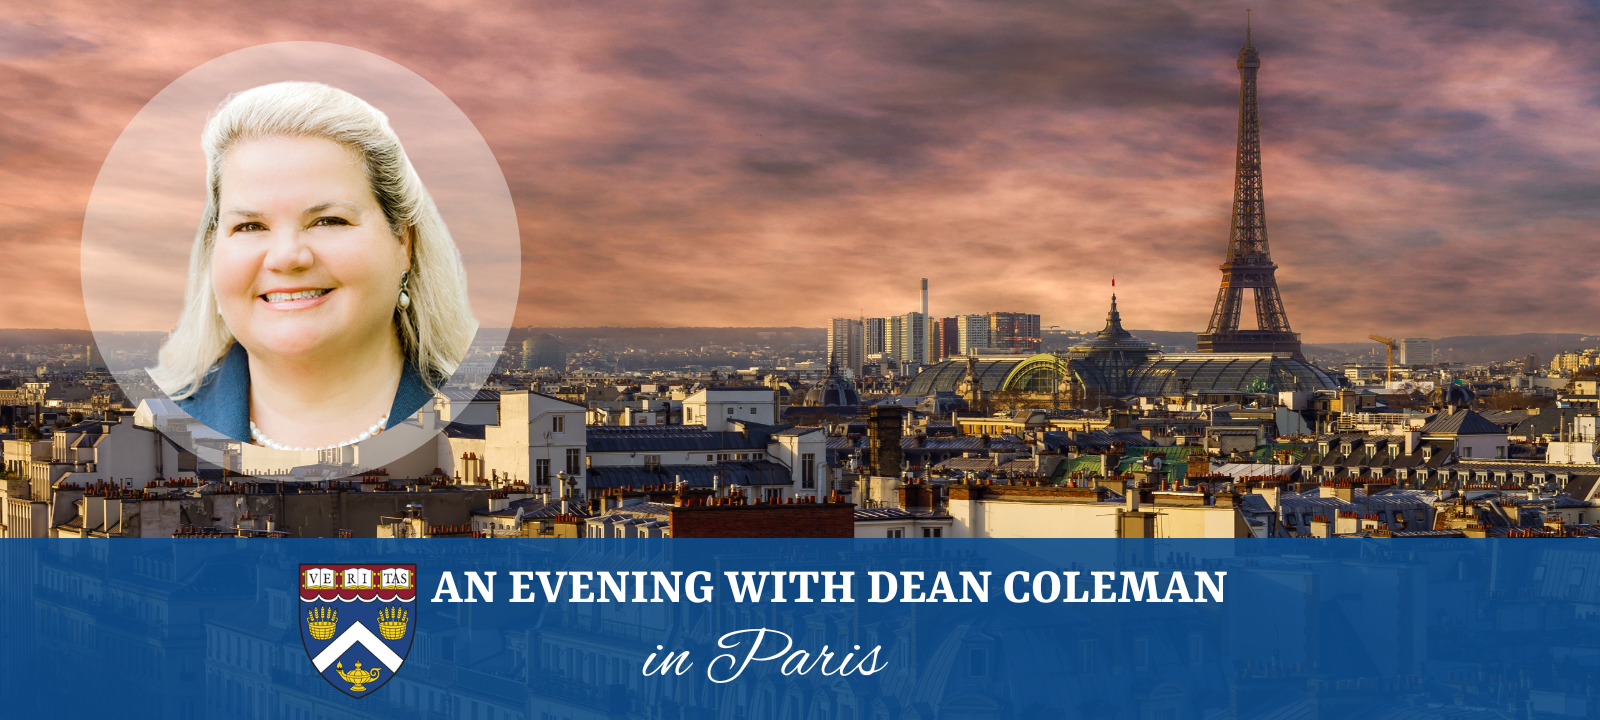 An Evening with Dean Coleman in Paris